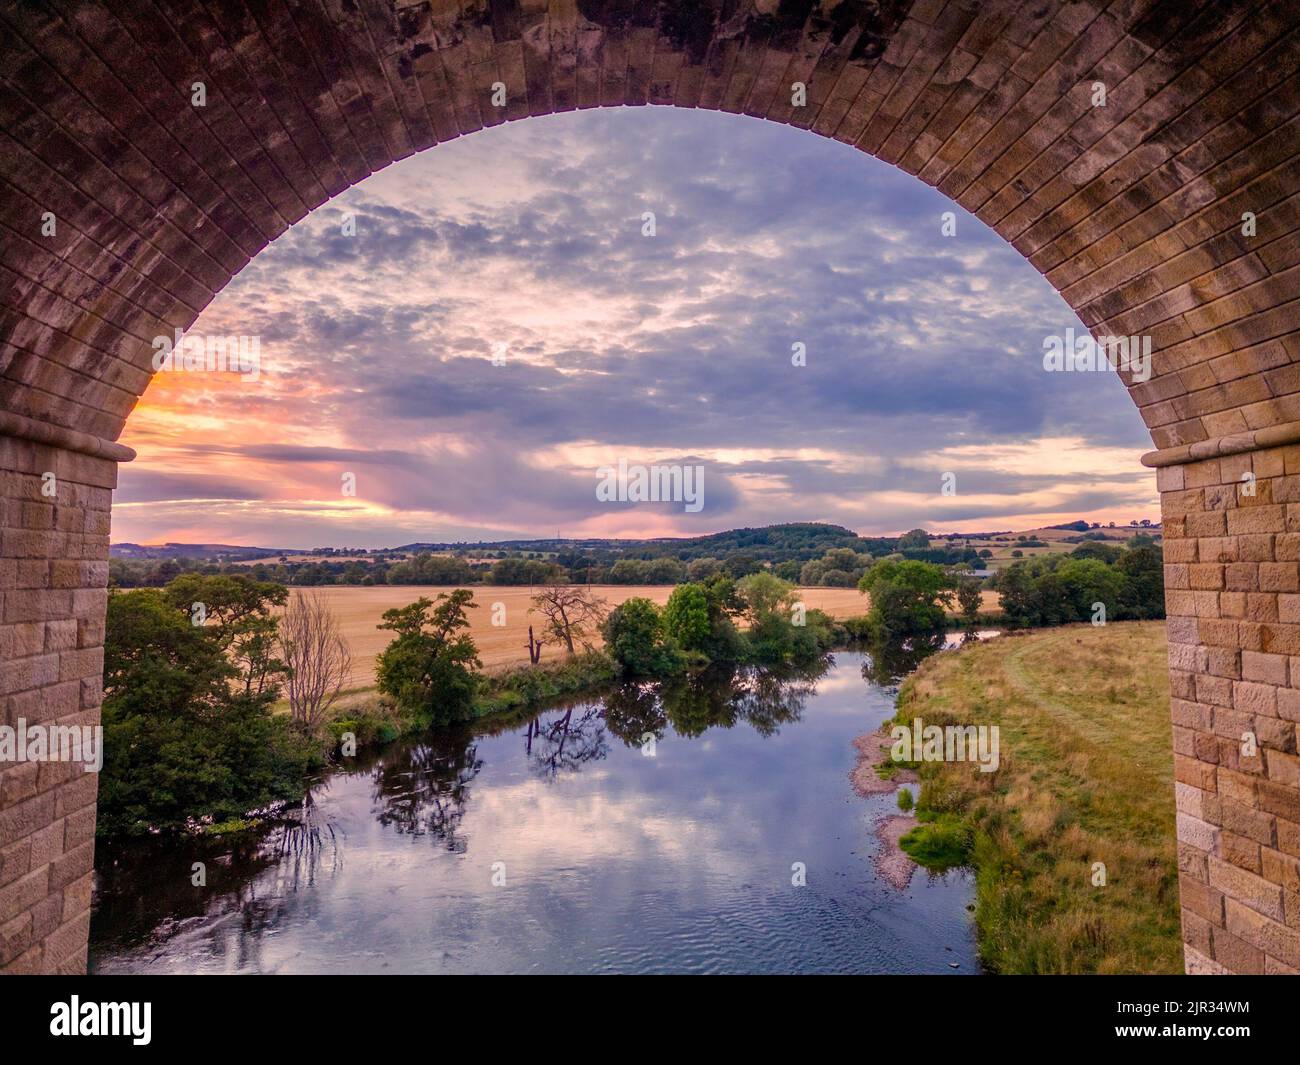 UK Weather: Beautiful eerial view of the sunset over the Yorkshire countryside and the River Wharfe viewed through an arch of Arthington Viaduct. Stock Photo